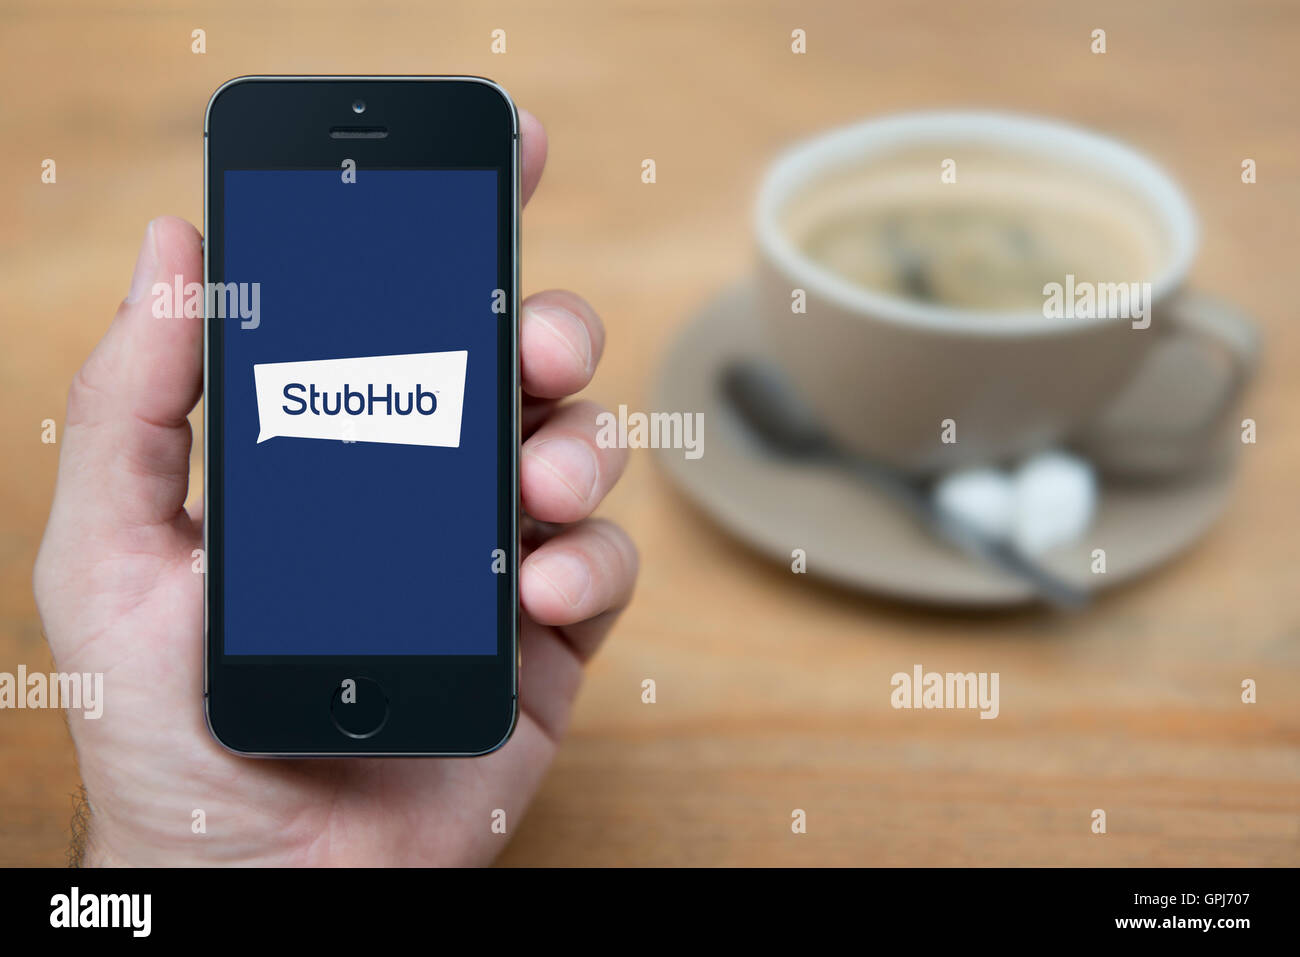 A man looks at his iPhone which displays the StubHub logo, while sat with a cup of coffee (Editorial use only). Stock Photo